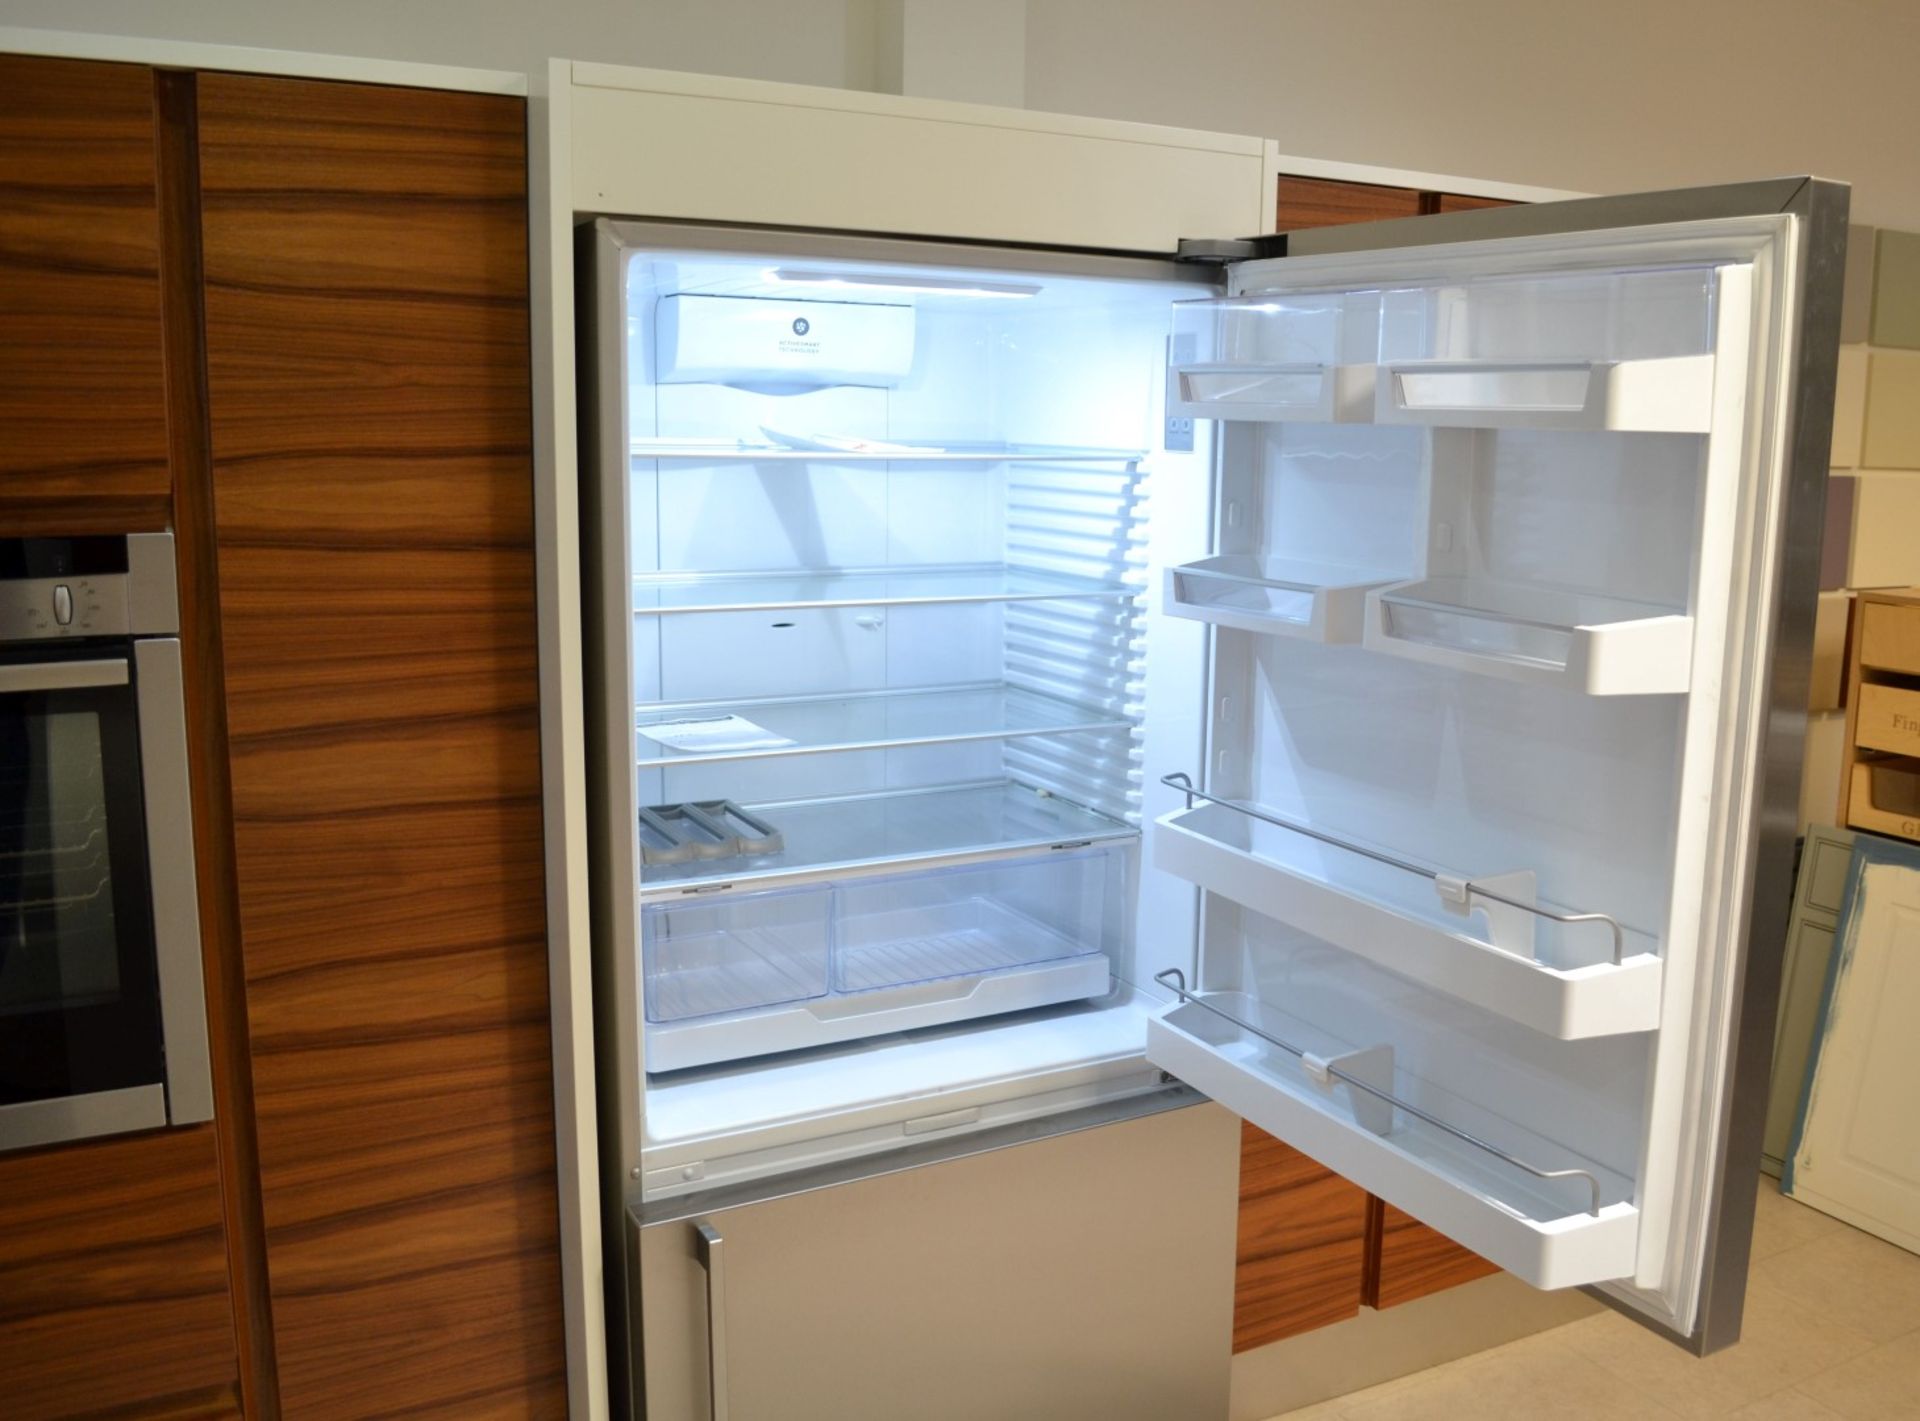 1 x Fisher & Paykel Stainless Steel 790mm 469 Litre Fridge Freezer from Showroom Display Kitchen - - Image 6 of 17